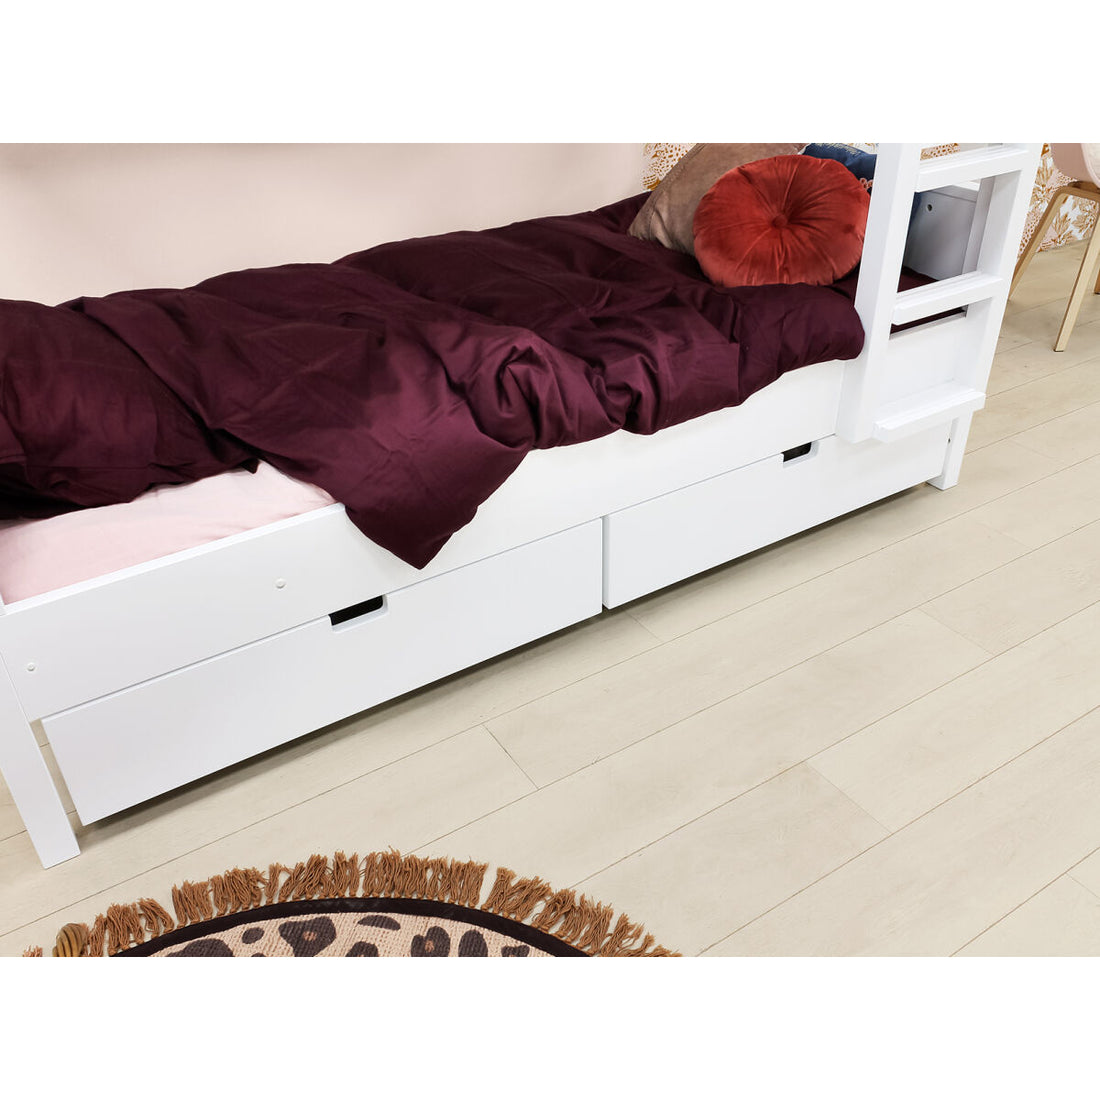 bopita-bunk-bed-90x200-with-straight-stairs-combiflex-white-bopt-56014611- (8)